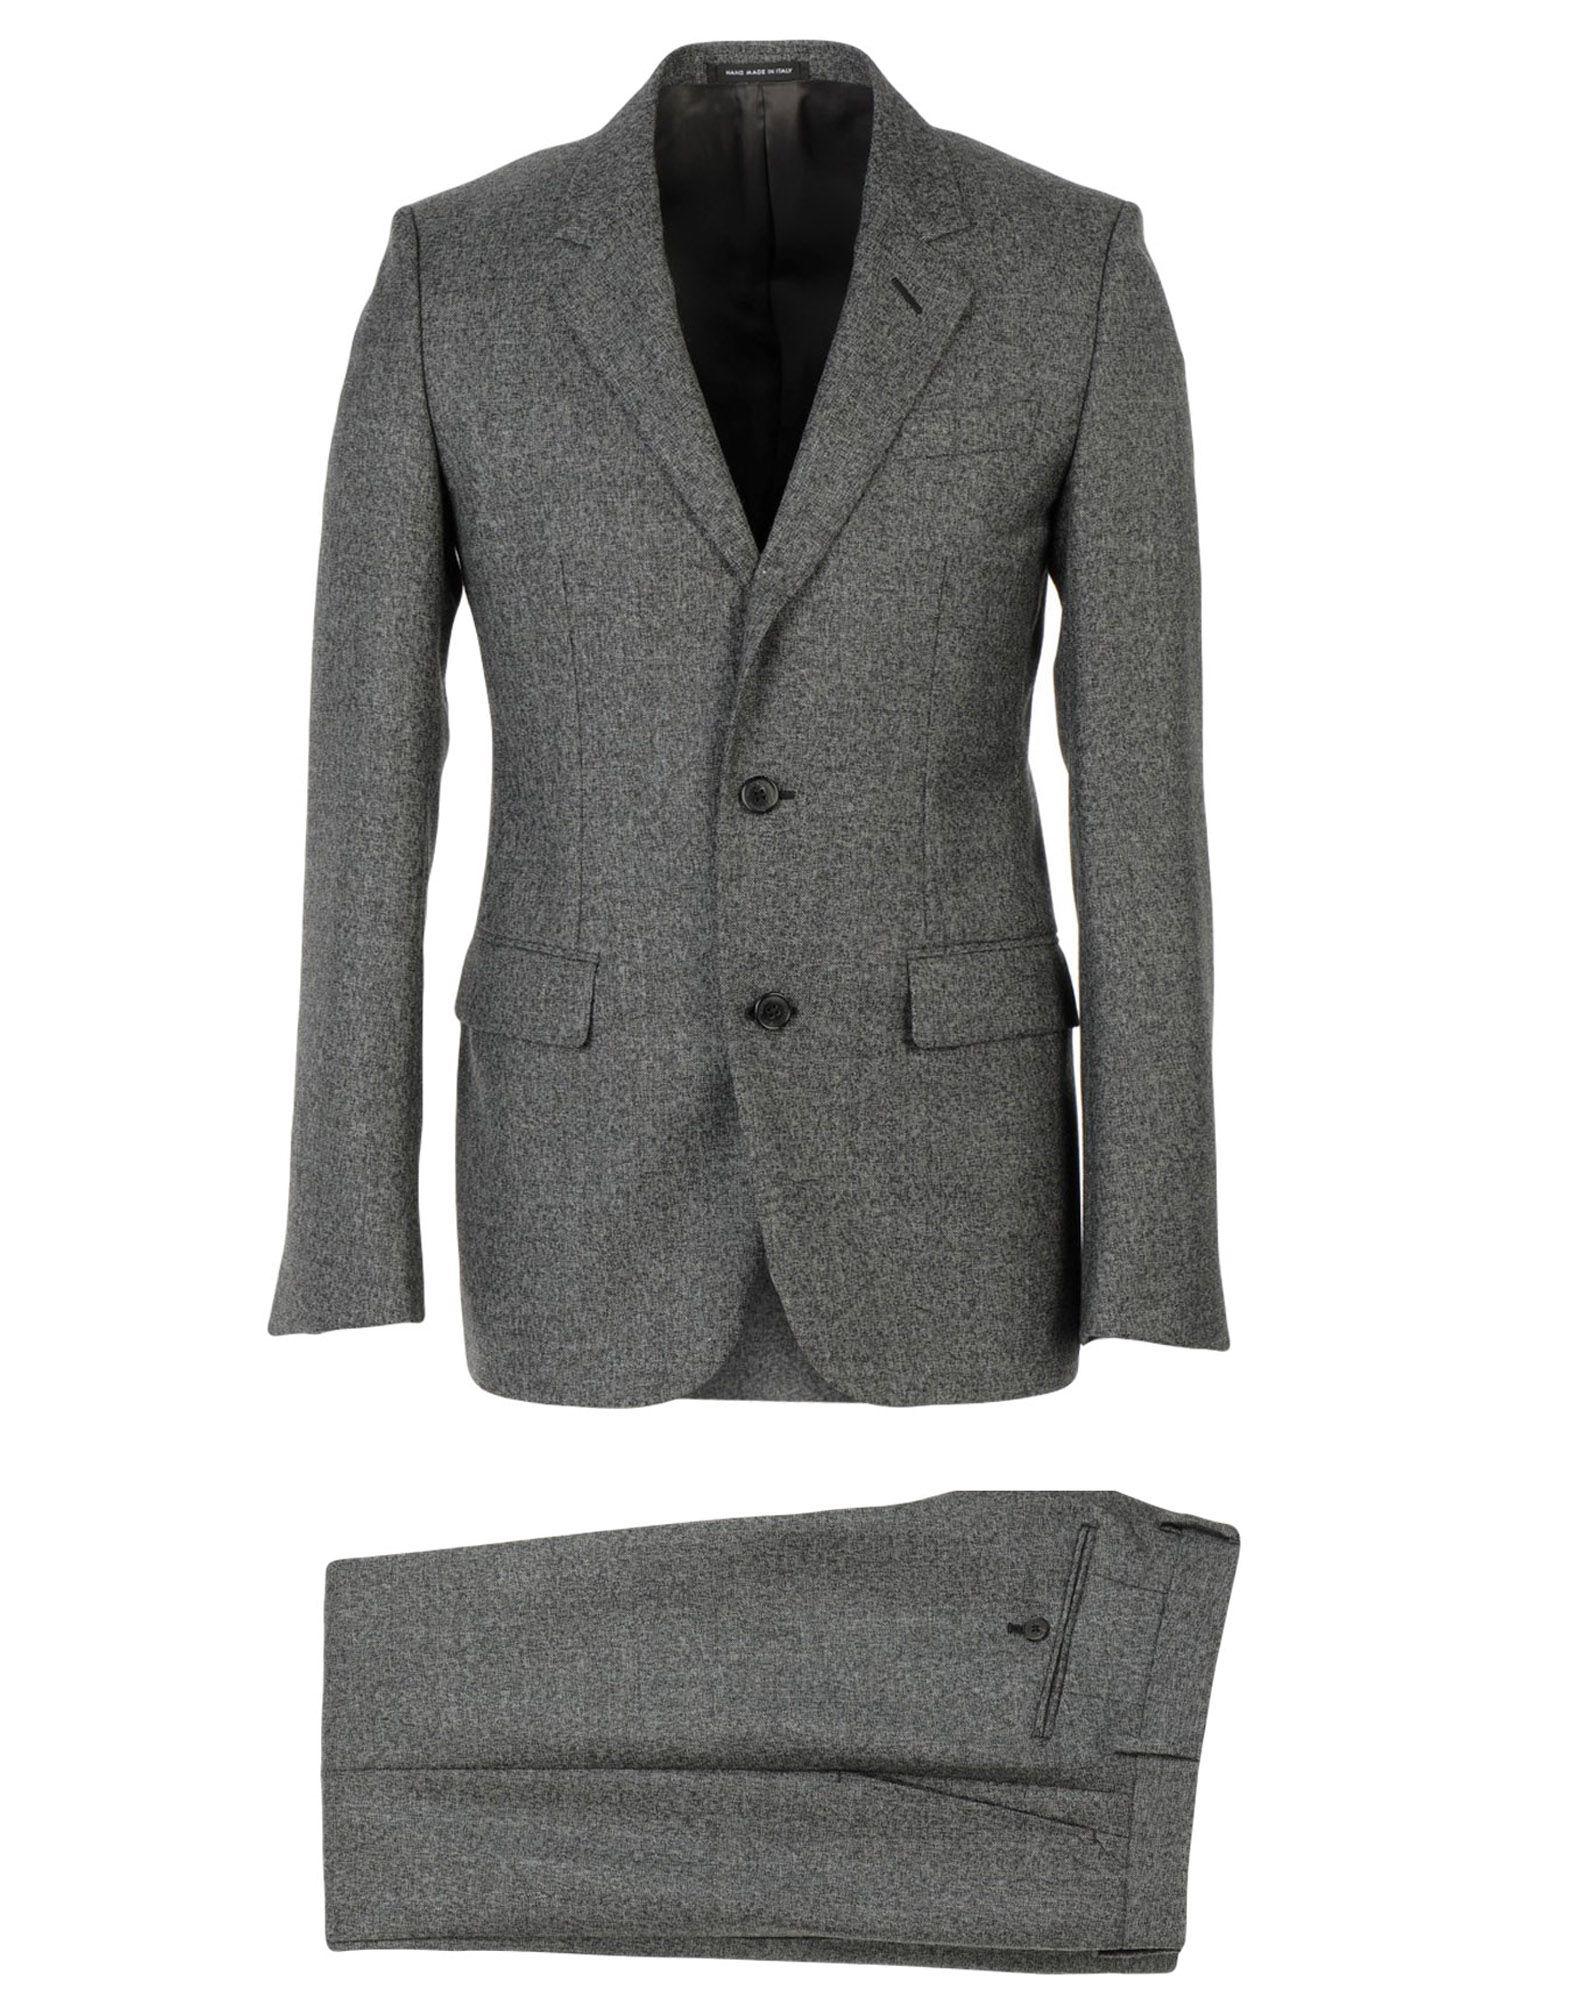 Mackintosh Flannel Suit in Lead (Gray) for Men - Lyst